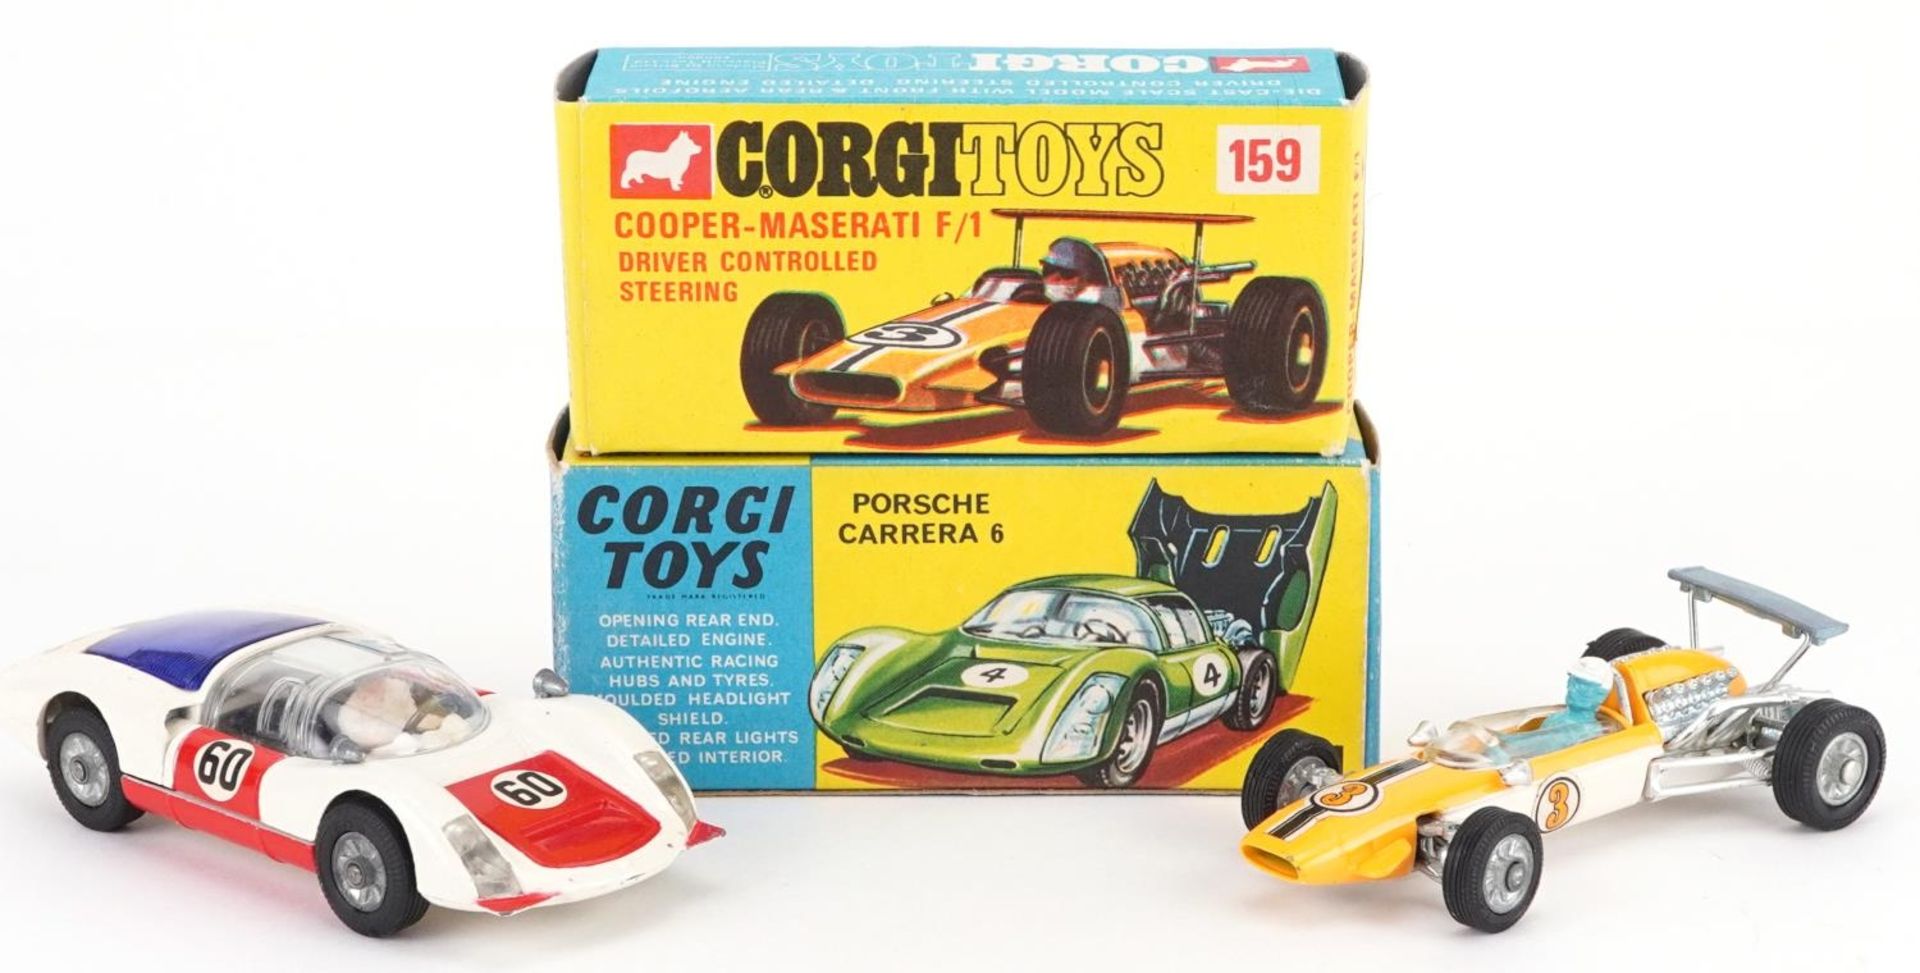 Two vintage Corgi Toys diecast racing vehicles with boxes comprising Porsche Carrera 6 330 and